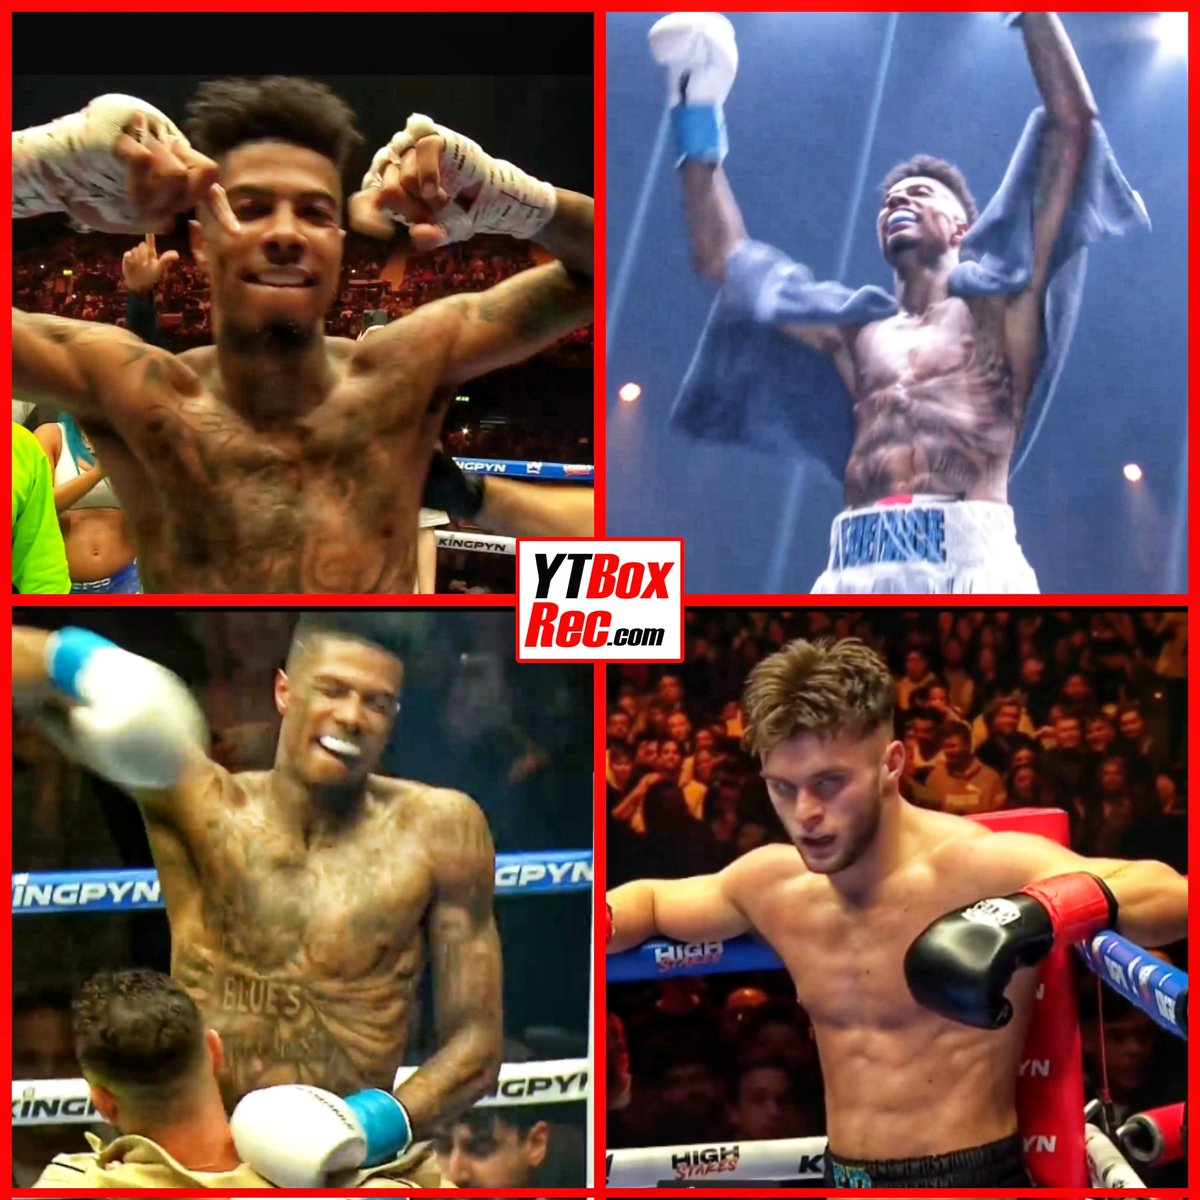 🚨 Blueface beats Ed Matthews by TKO in round 4 ❗

#KingpynQF